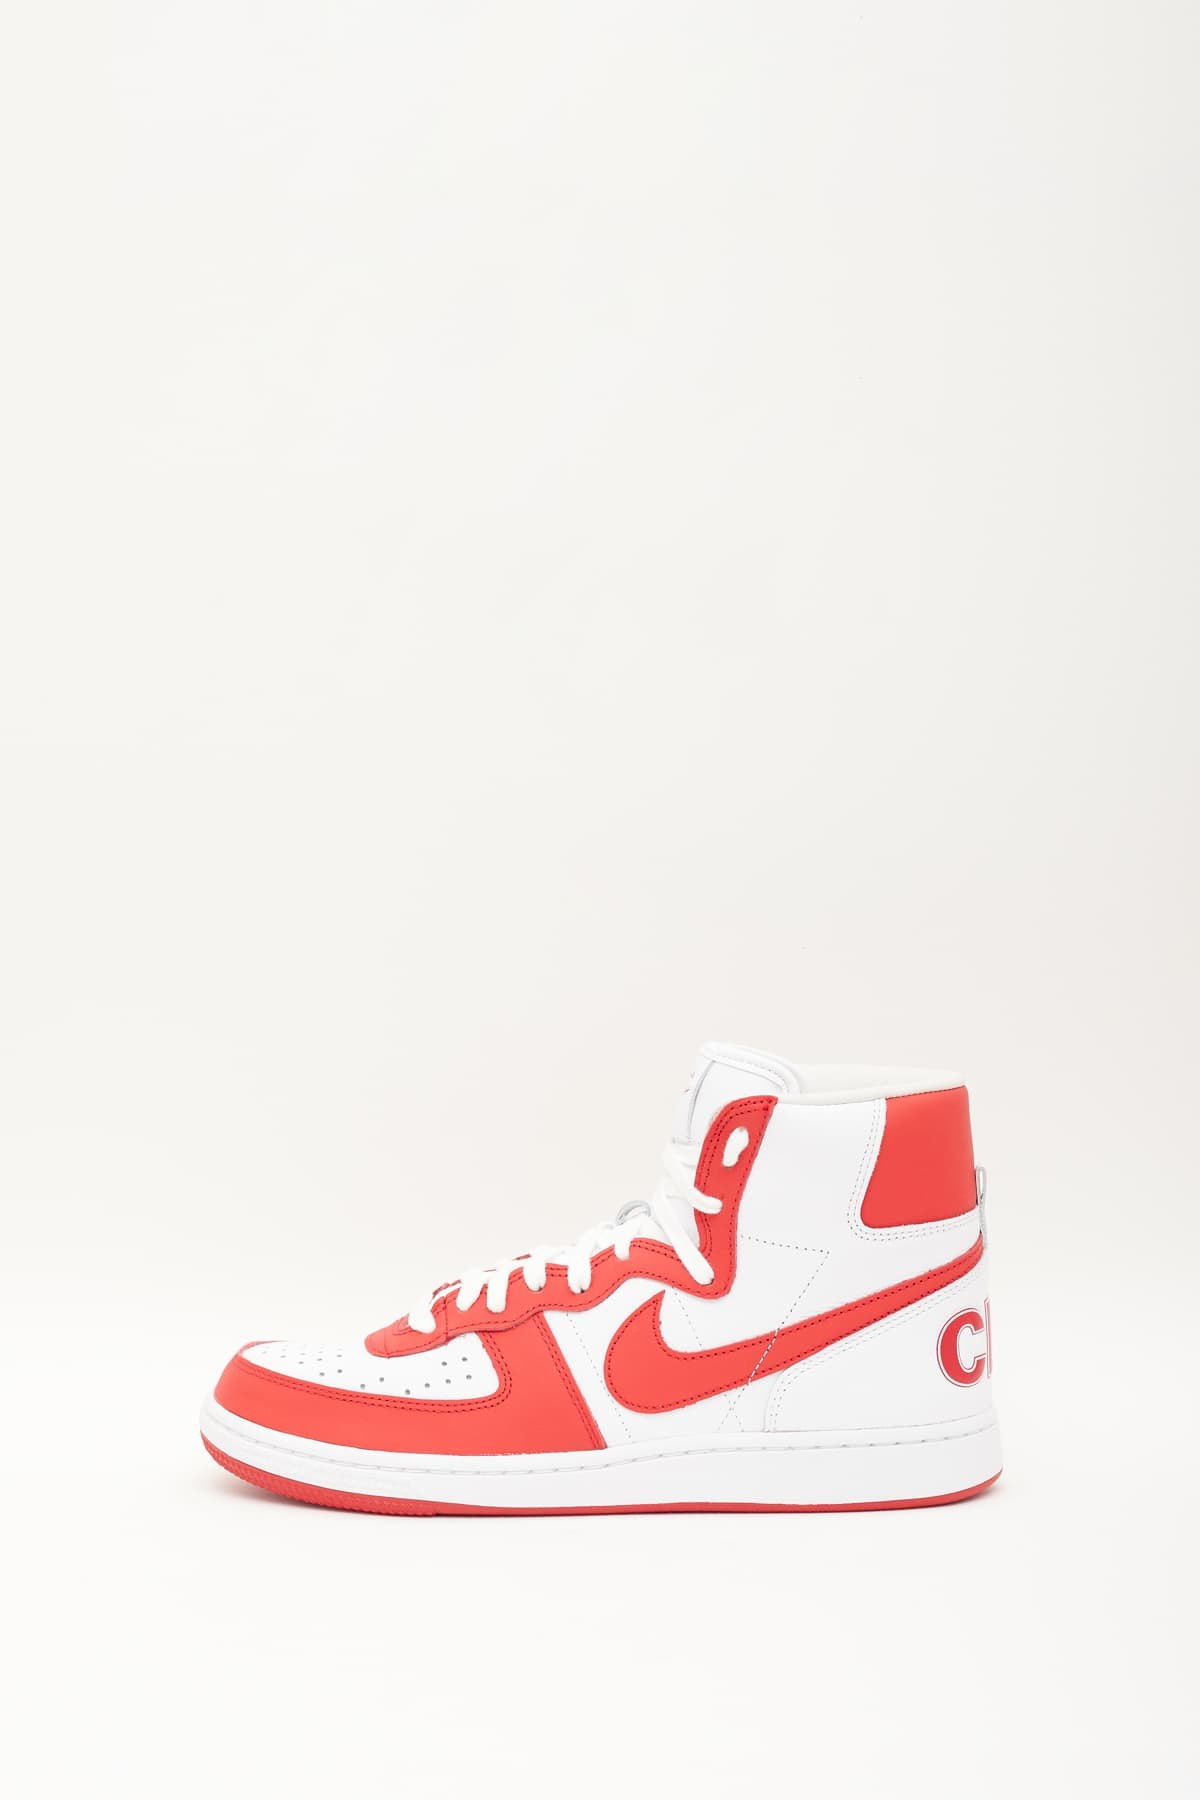 COMME DES GARCONS HOMME PLUS X NIKE RED SNEAKERS IAMNUE